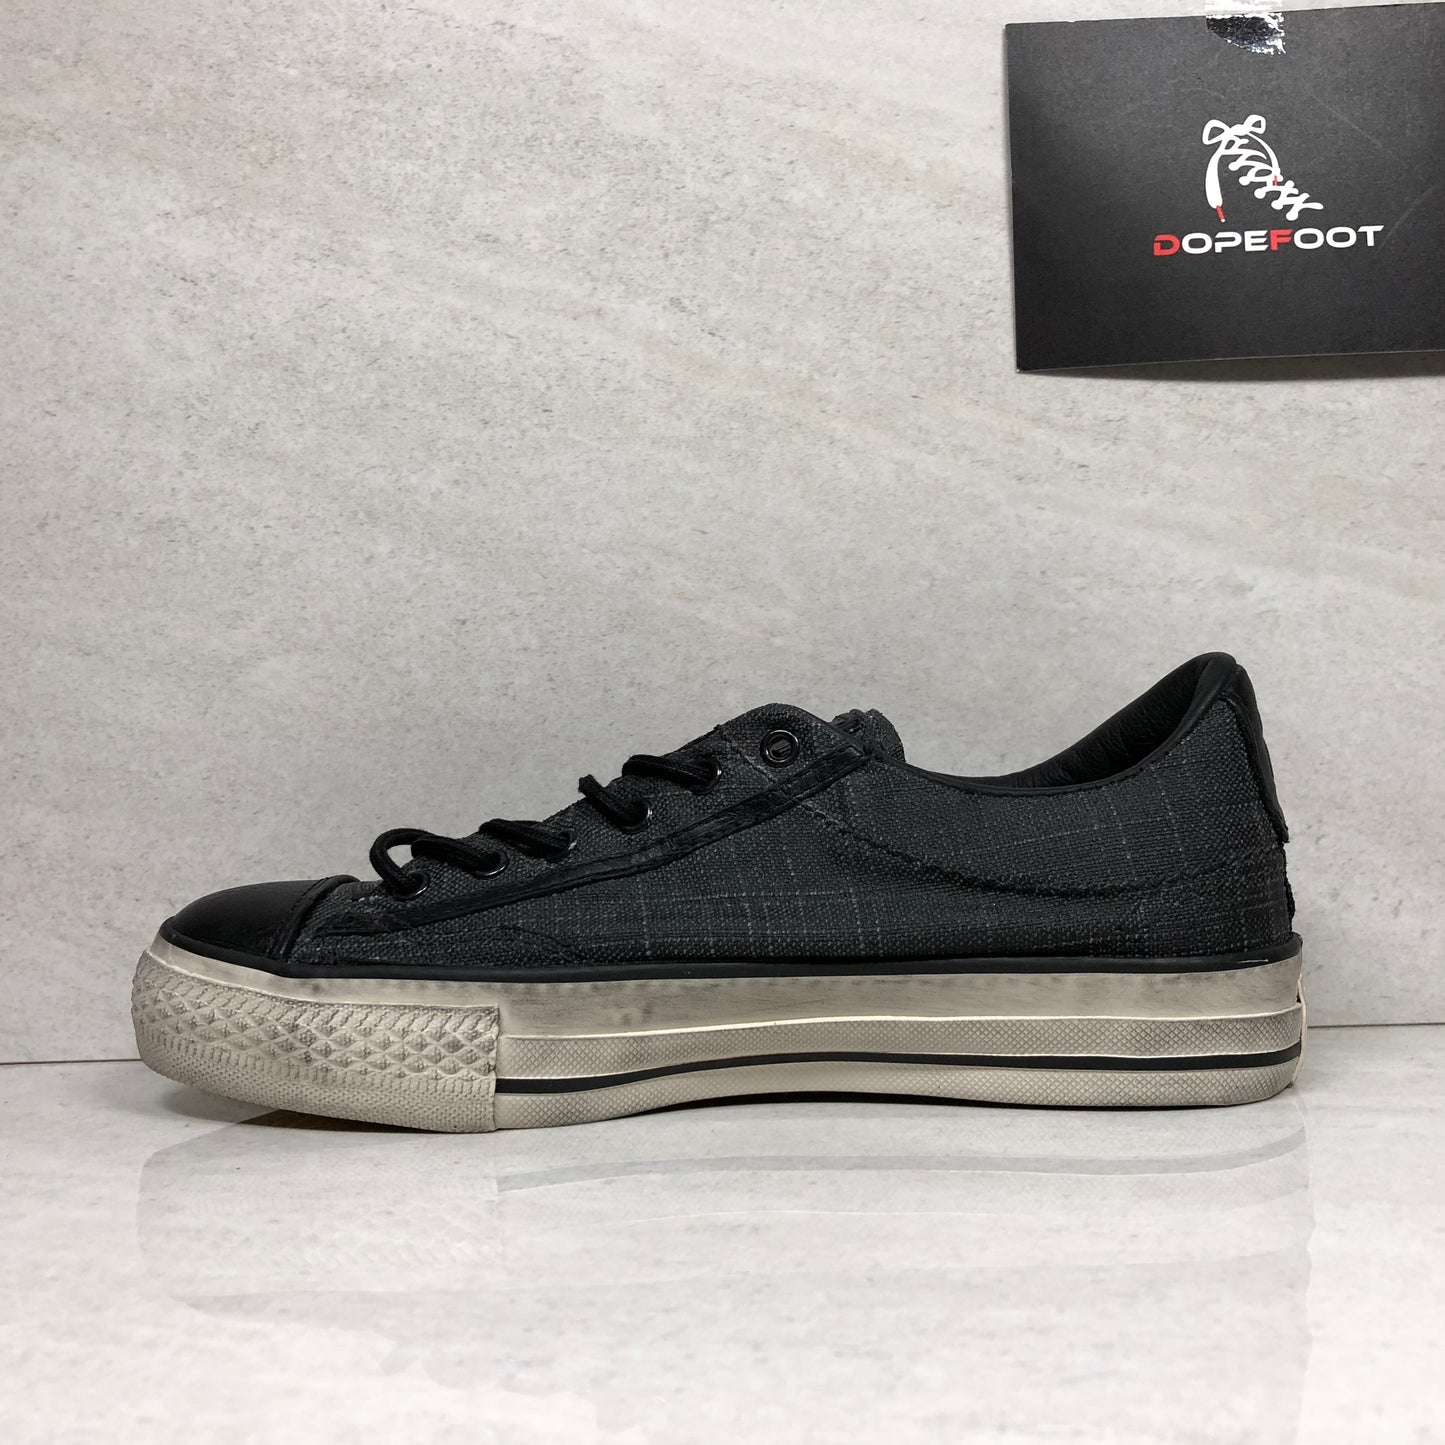 DS Converse Chuck Taylor Coated Canvas Low Top Tamaño 3-6.5M/5-8.5W Negro 150179C